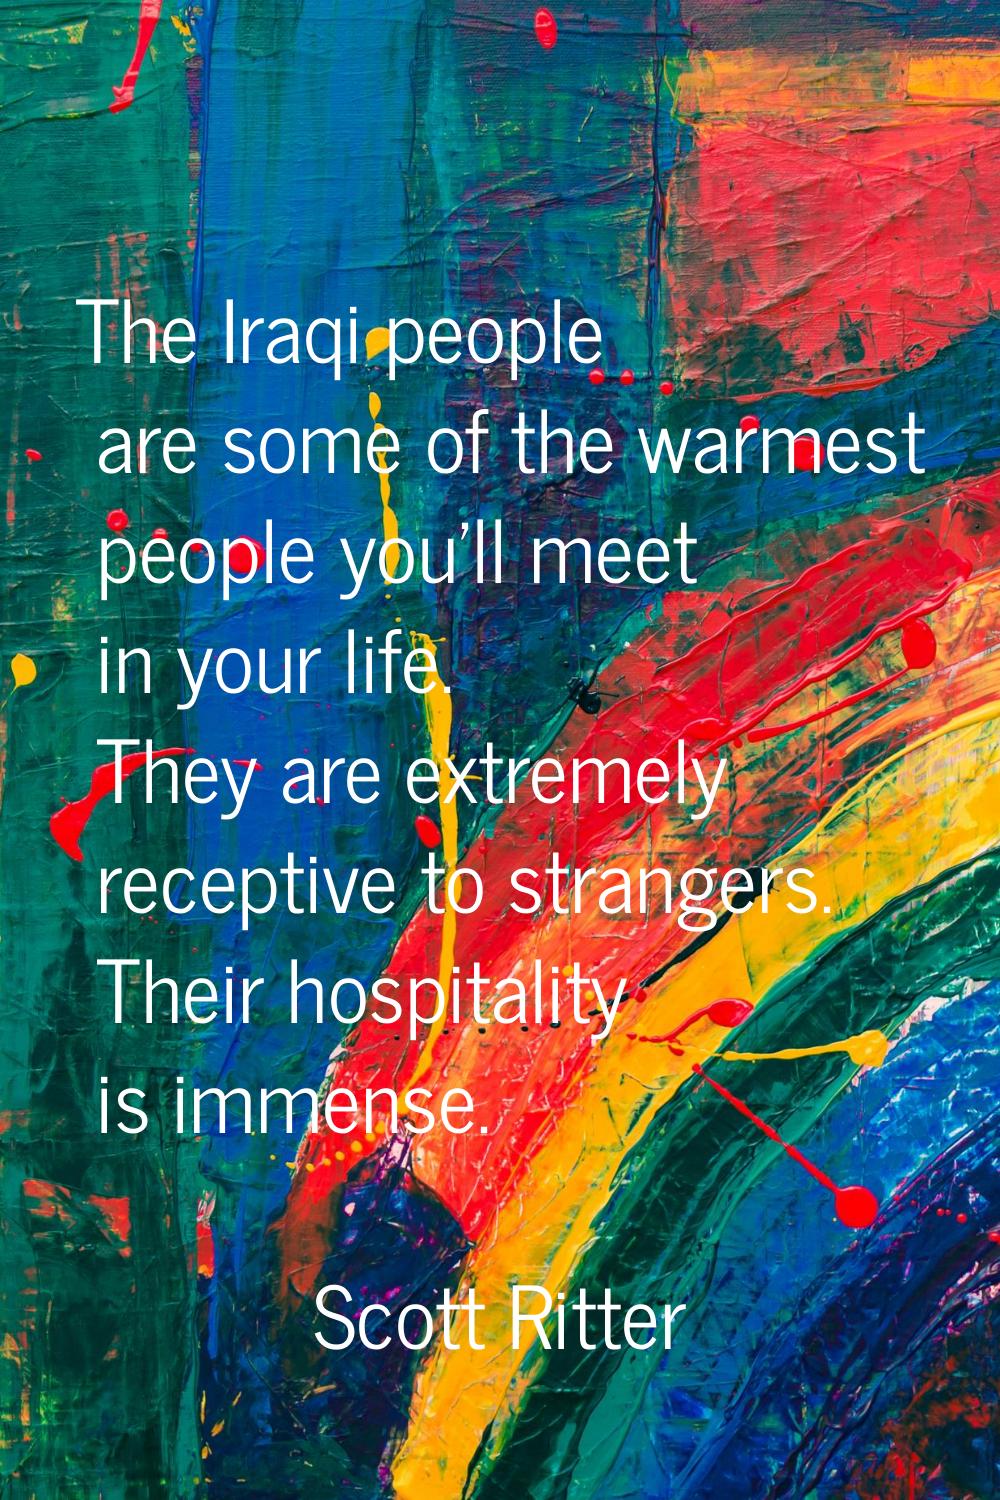 The Iraqi people are some of the warmest people you'll meet in your life. They are extremely recept